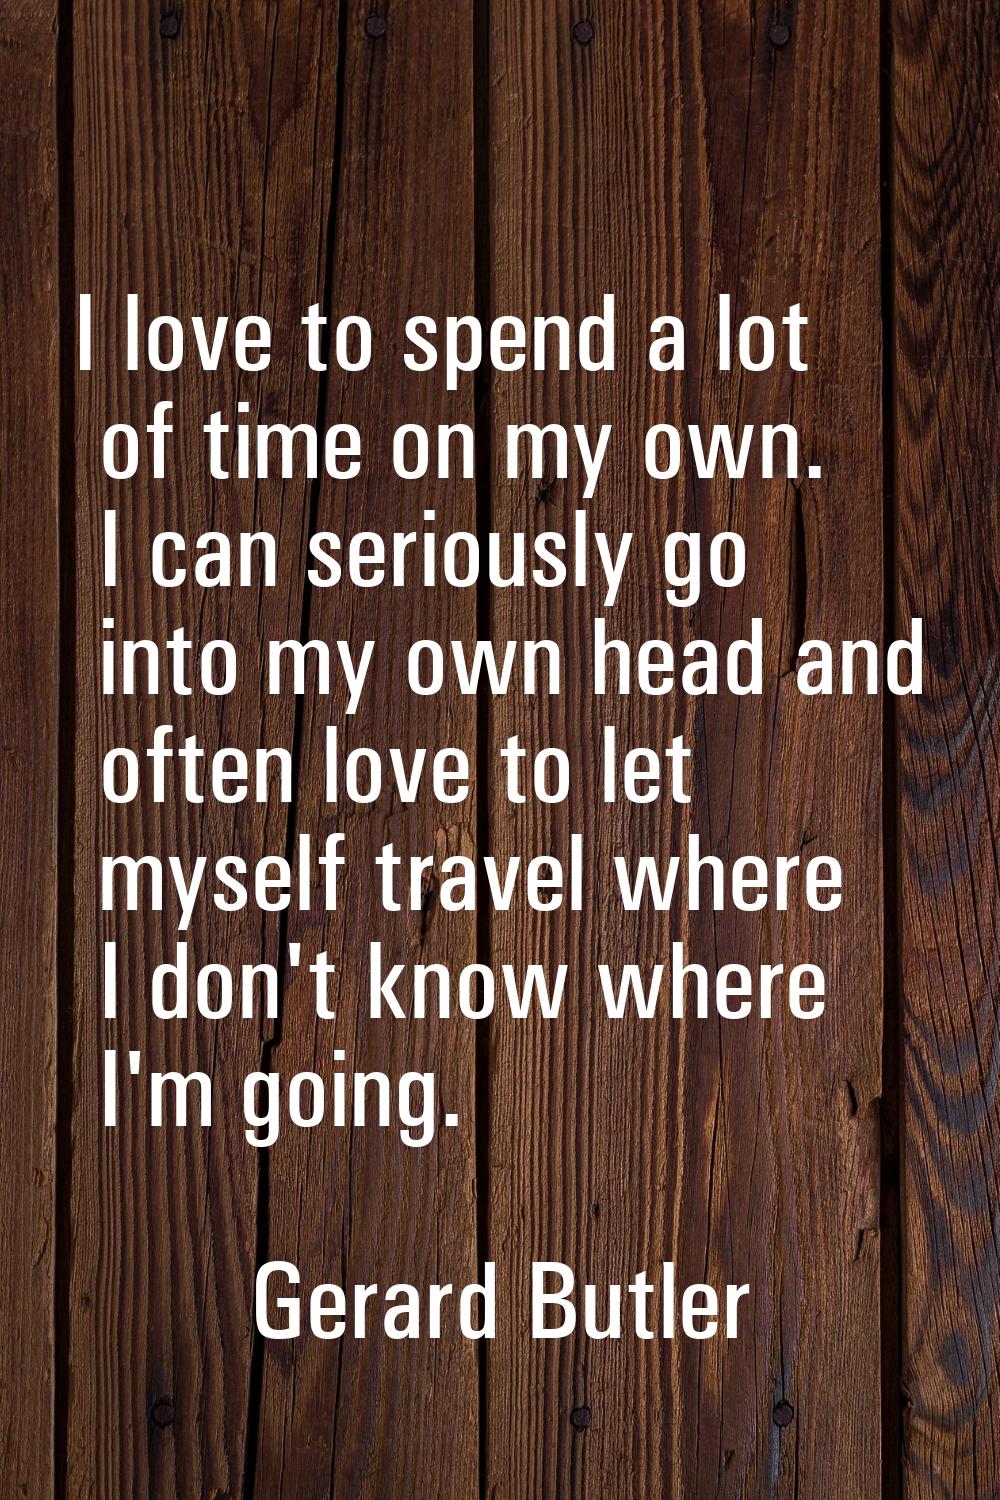 I love to spend a lot of time on my own. I can seriously go into my own head and often love to let 